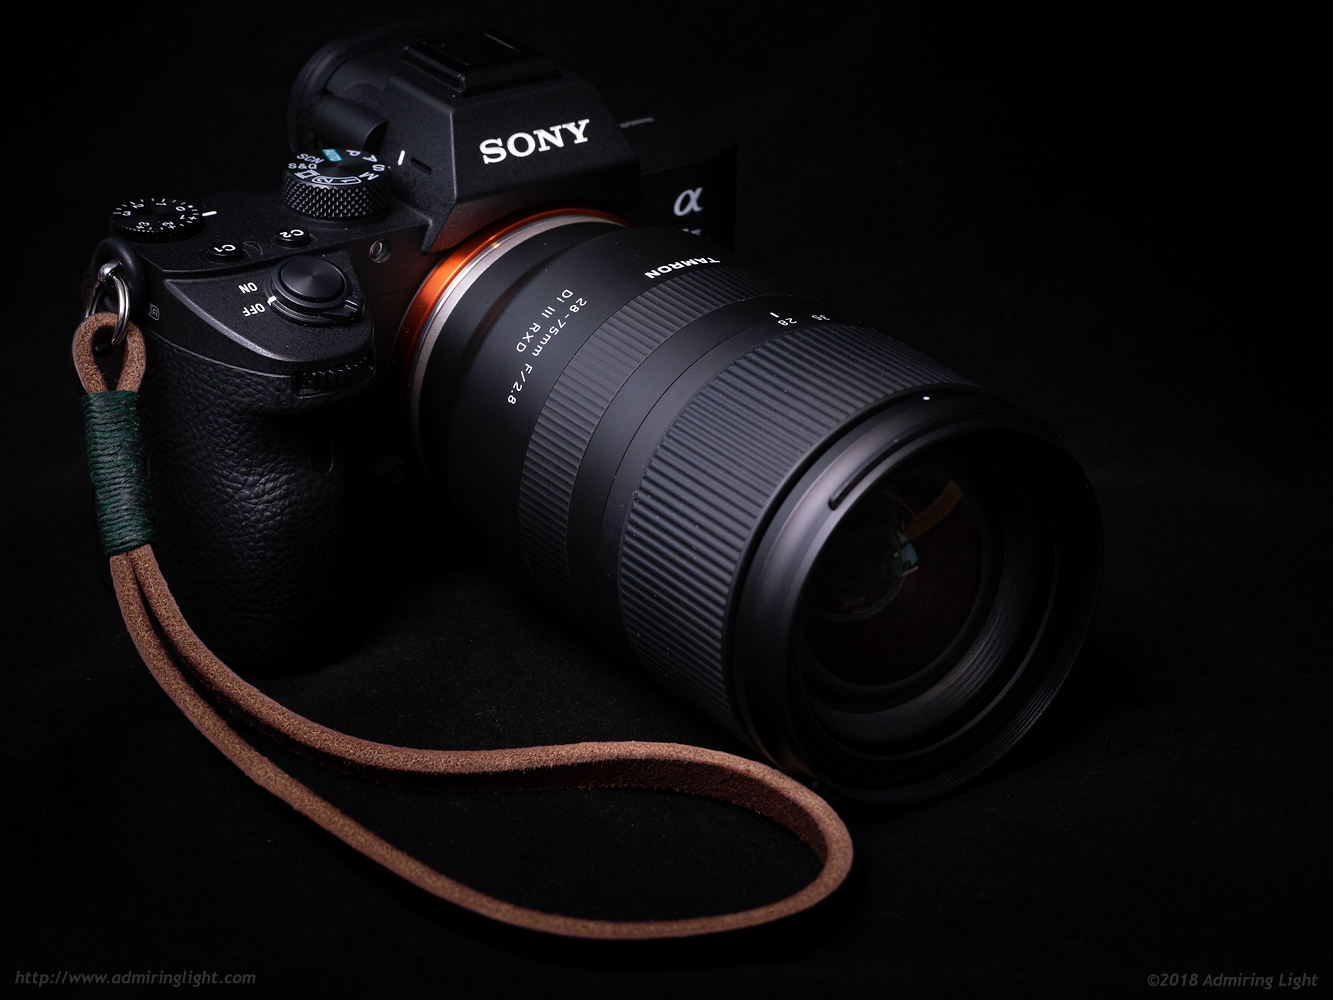 Review: Tamron 28-75mm f/2.8 Di III RXD (Sony E-Mount) - Page 2 of 